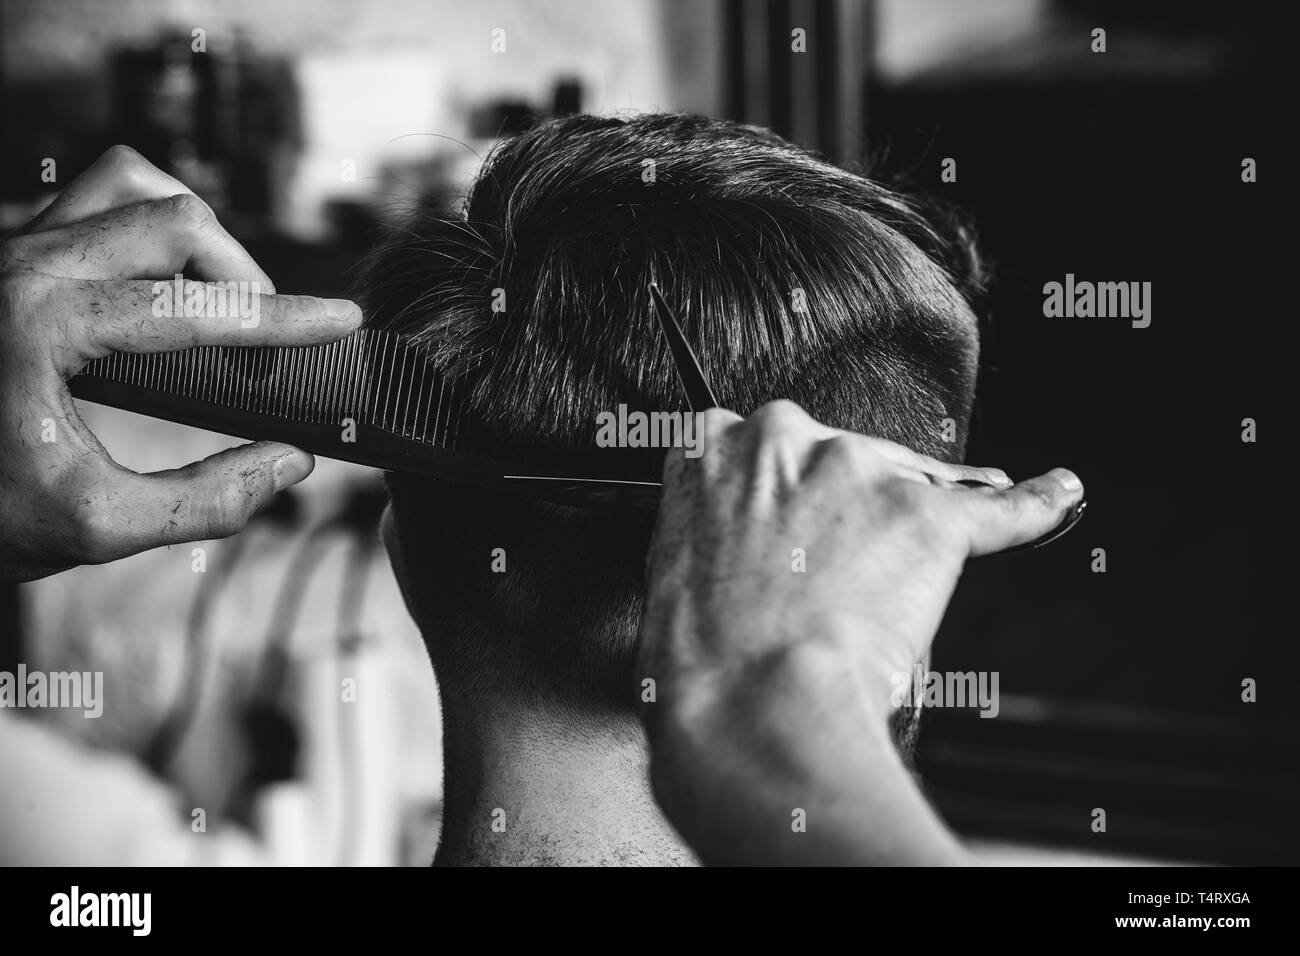 Barber Shop Black and White Stock Photos & Images - Alamy